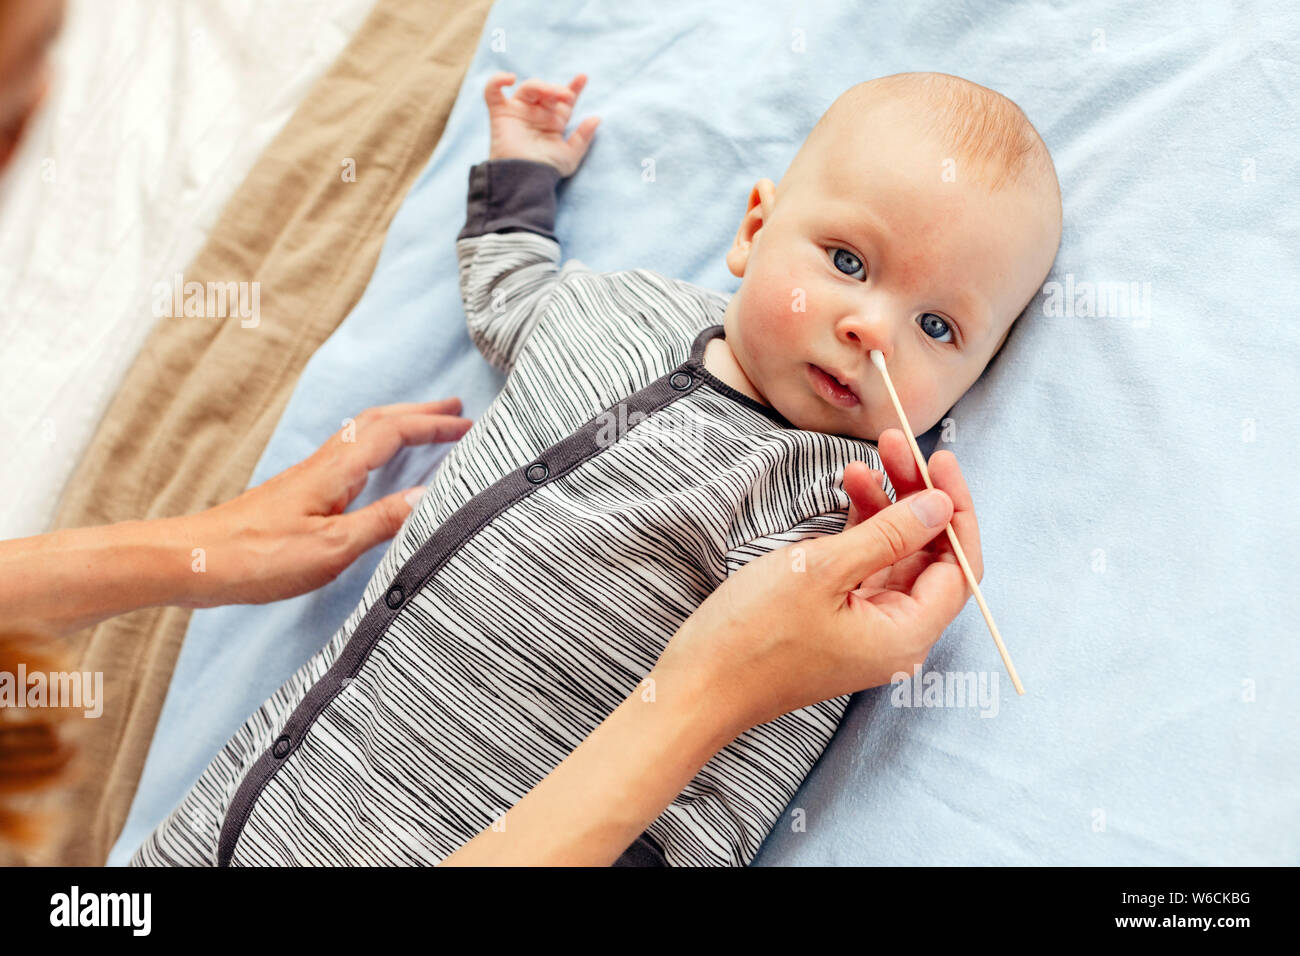 Mother cleaning nose to adorable baby Stock Photo